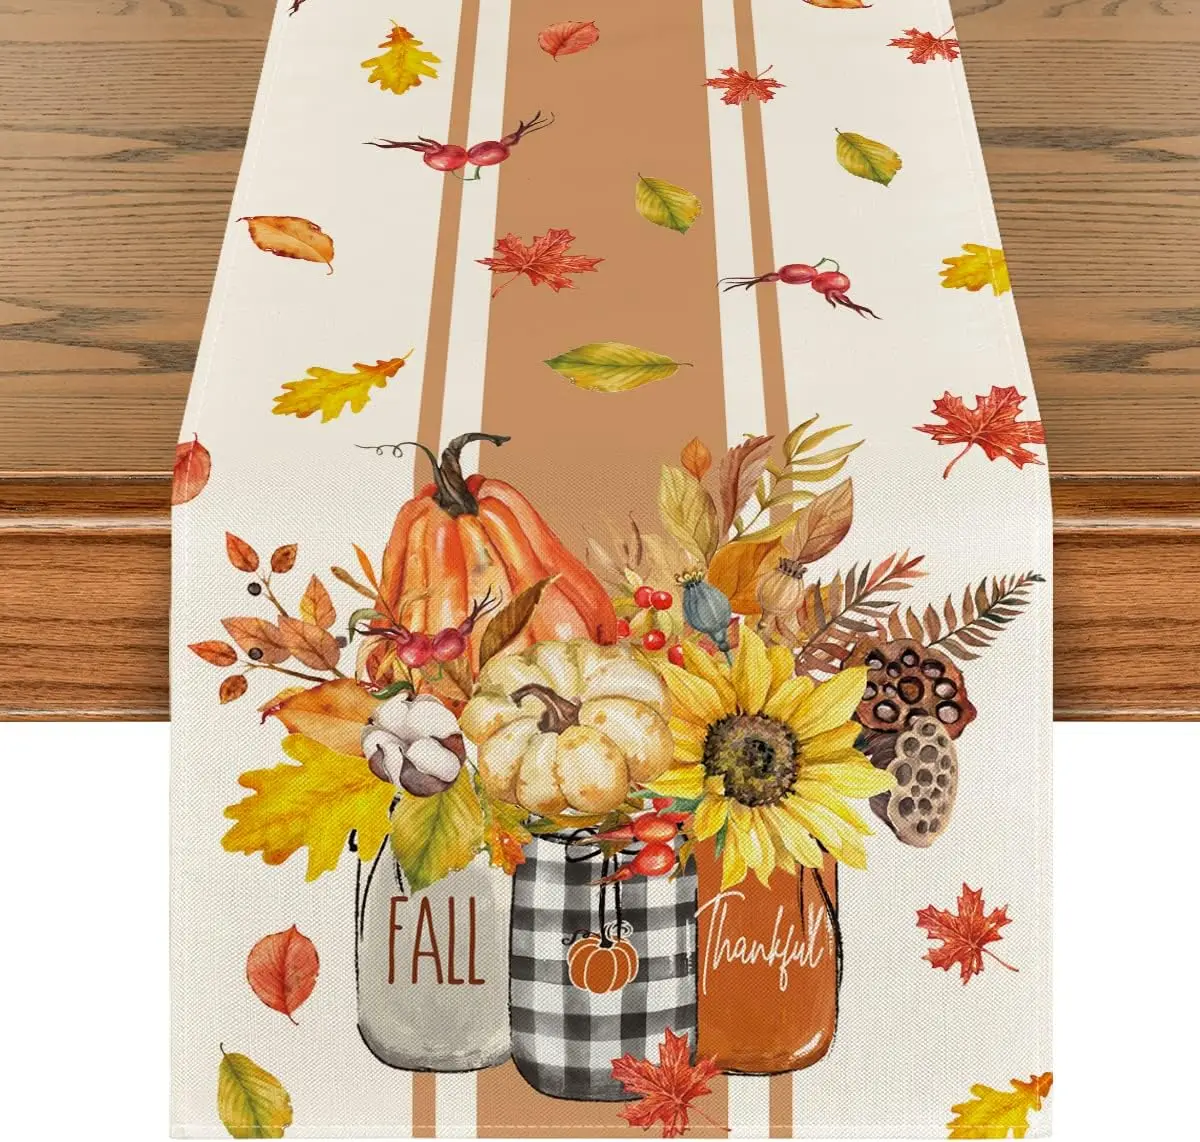 

Fall Thanksgiving Pumpkin Maple Leaf Linen Table Runners Kitchen Table Decor Farmhouse Table Runner for Dining Table Party Decor